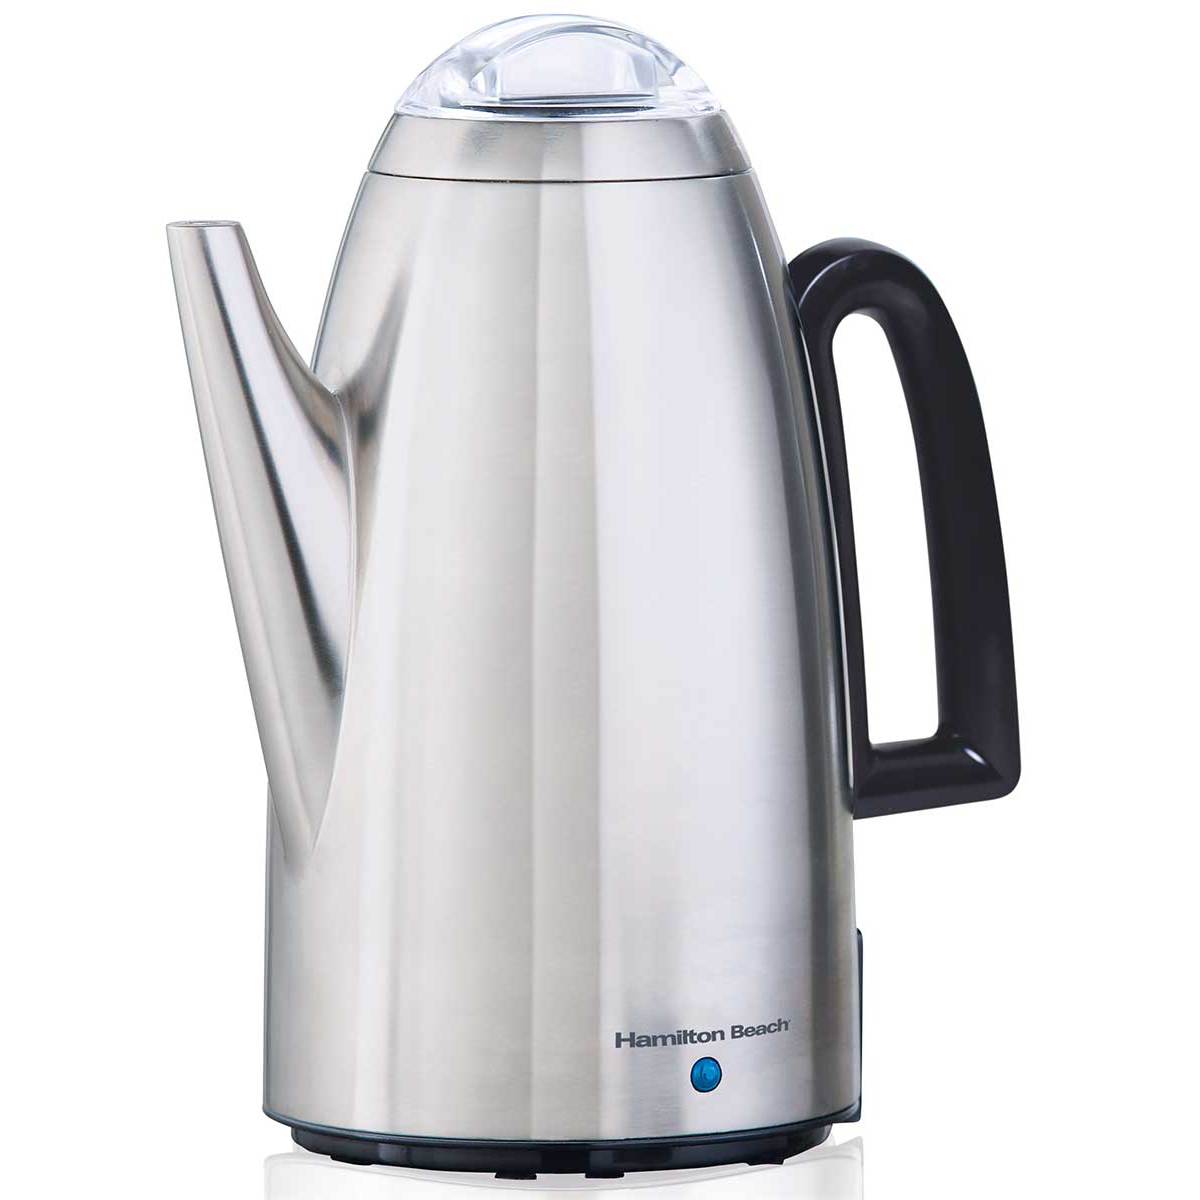 Stainless Steel 12 Cup Percolator (40614)